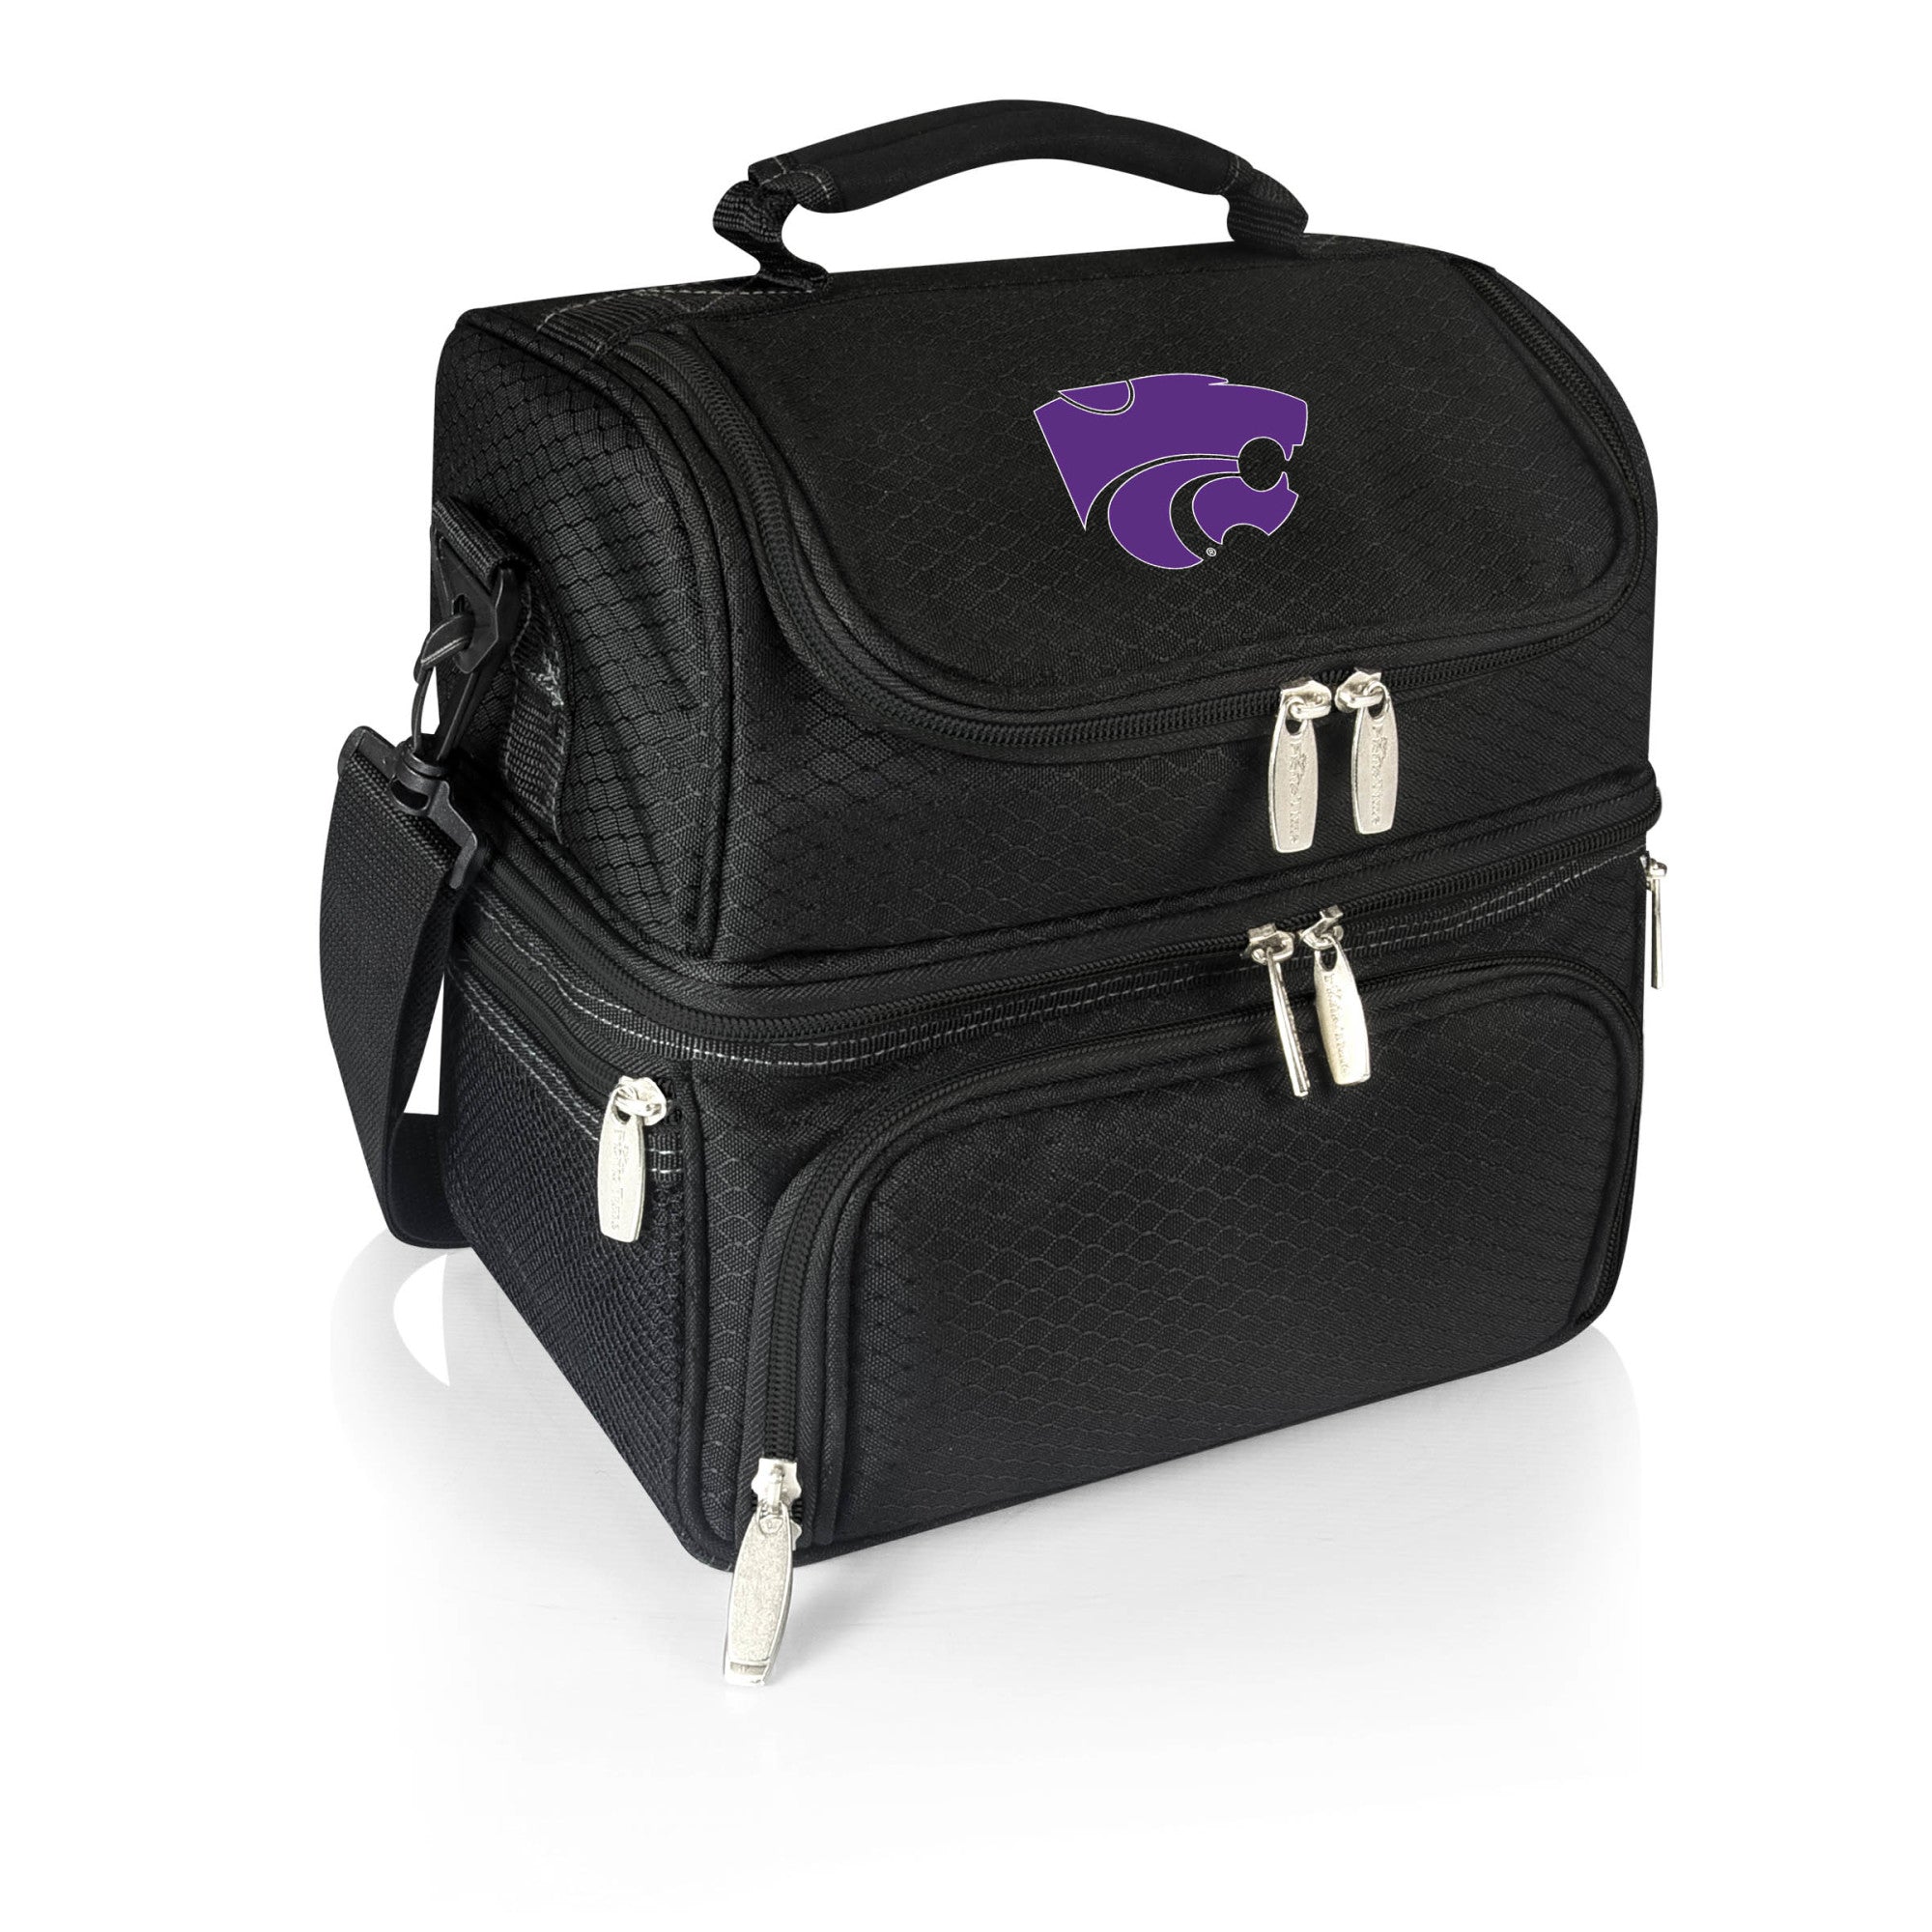 Kansas State Wildcats - Pranzo Lunch Bag Cooler with Utensils